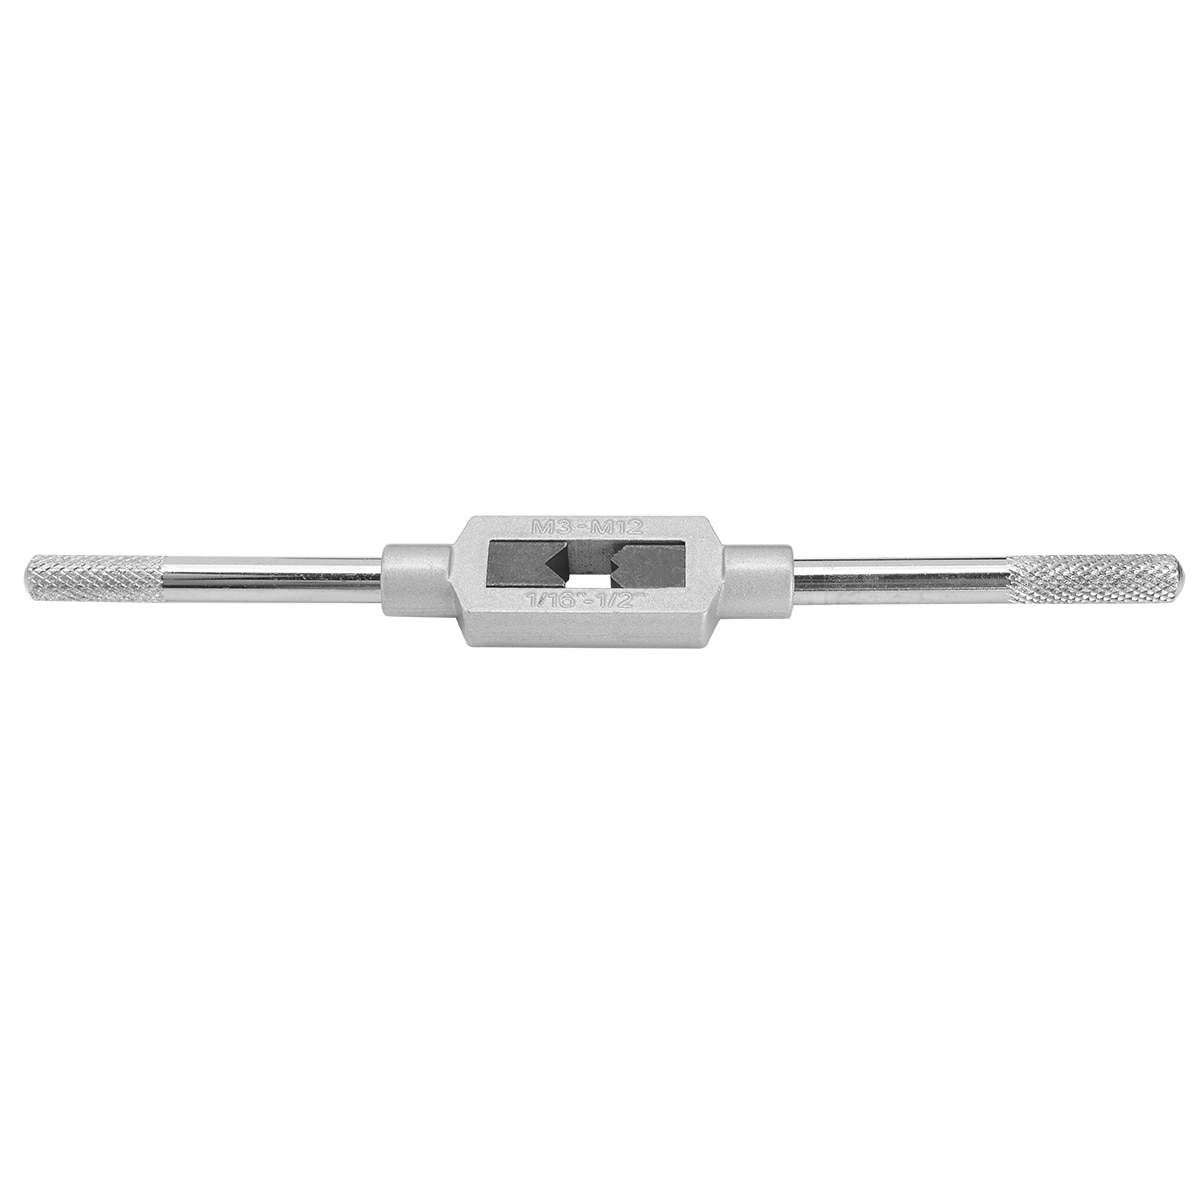 1pc M3-M12 1/16" to 1/2" Adjustable Engineers Tap Hinge Straight Tap Wrench Holder Threading Tool